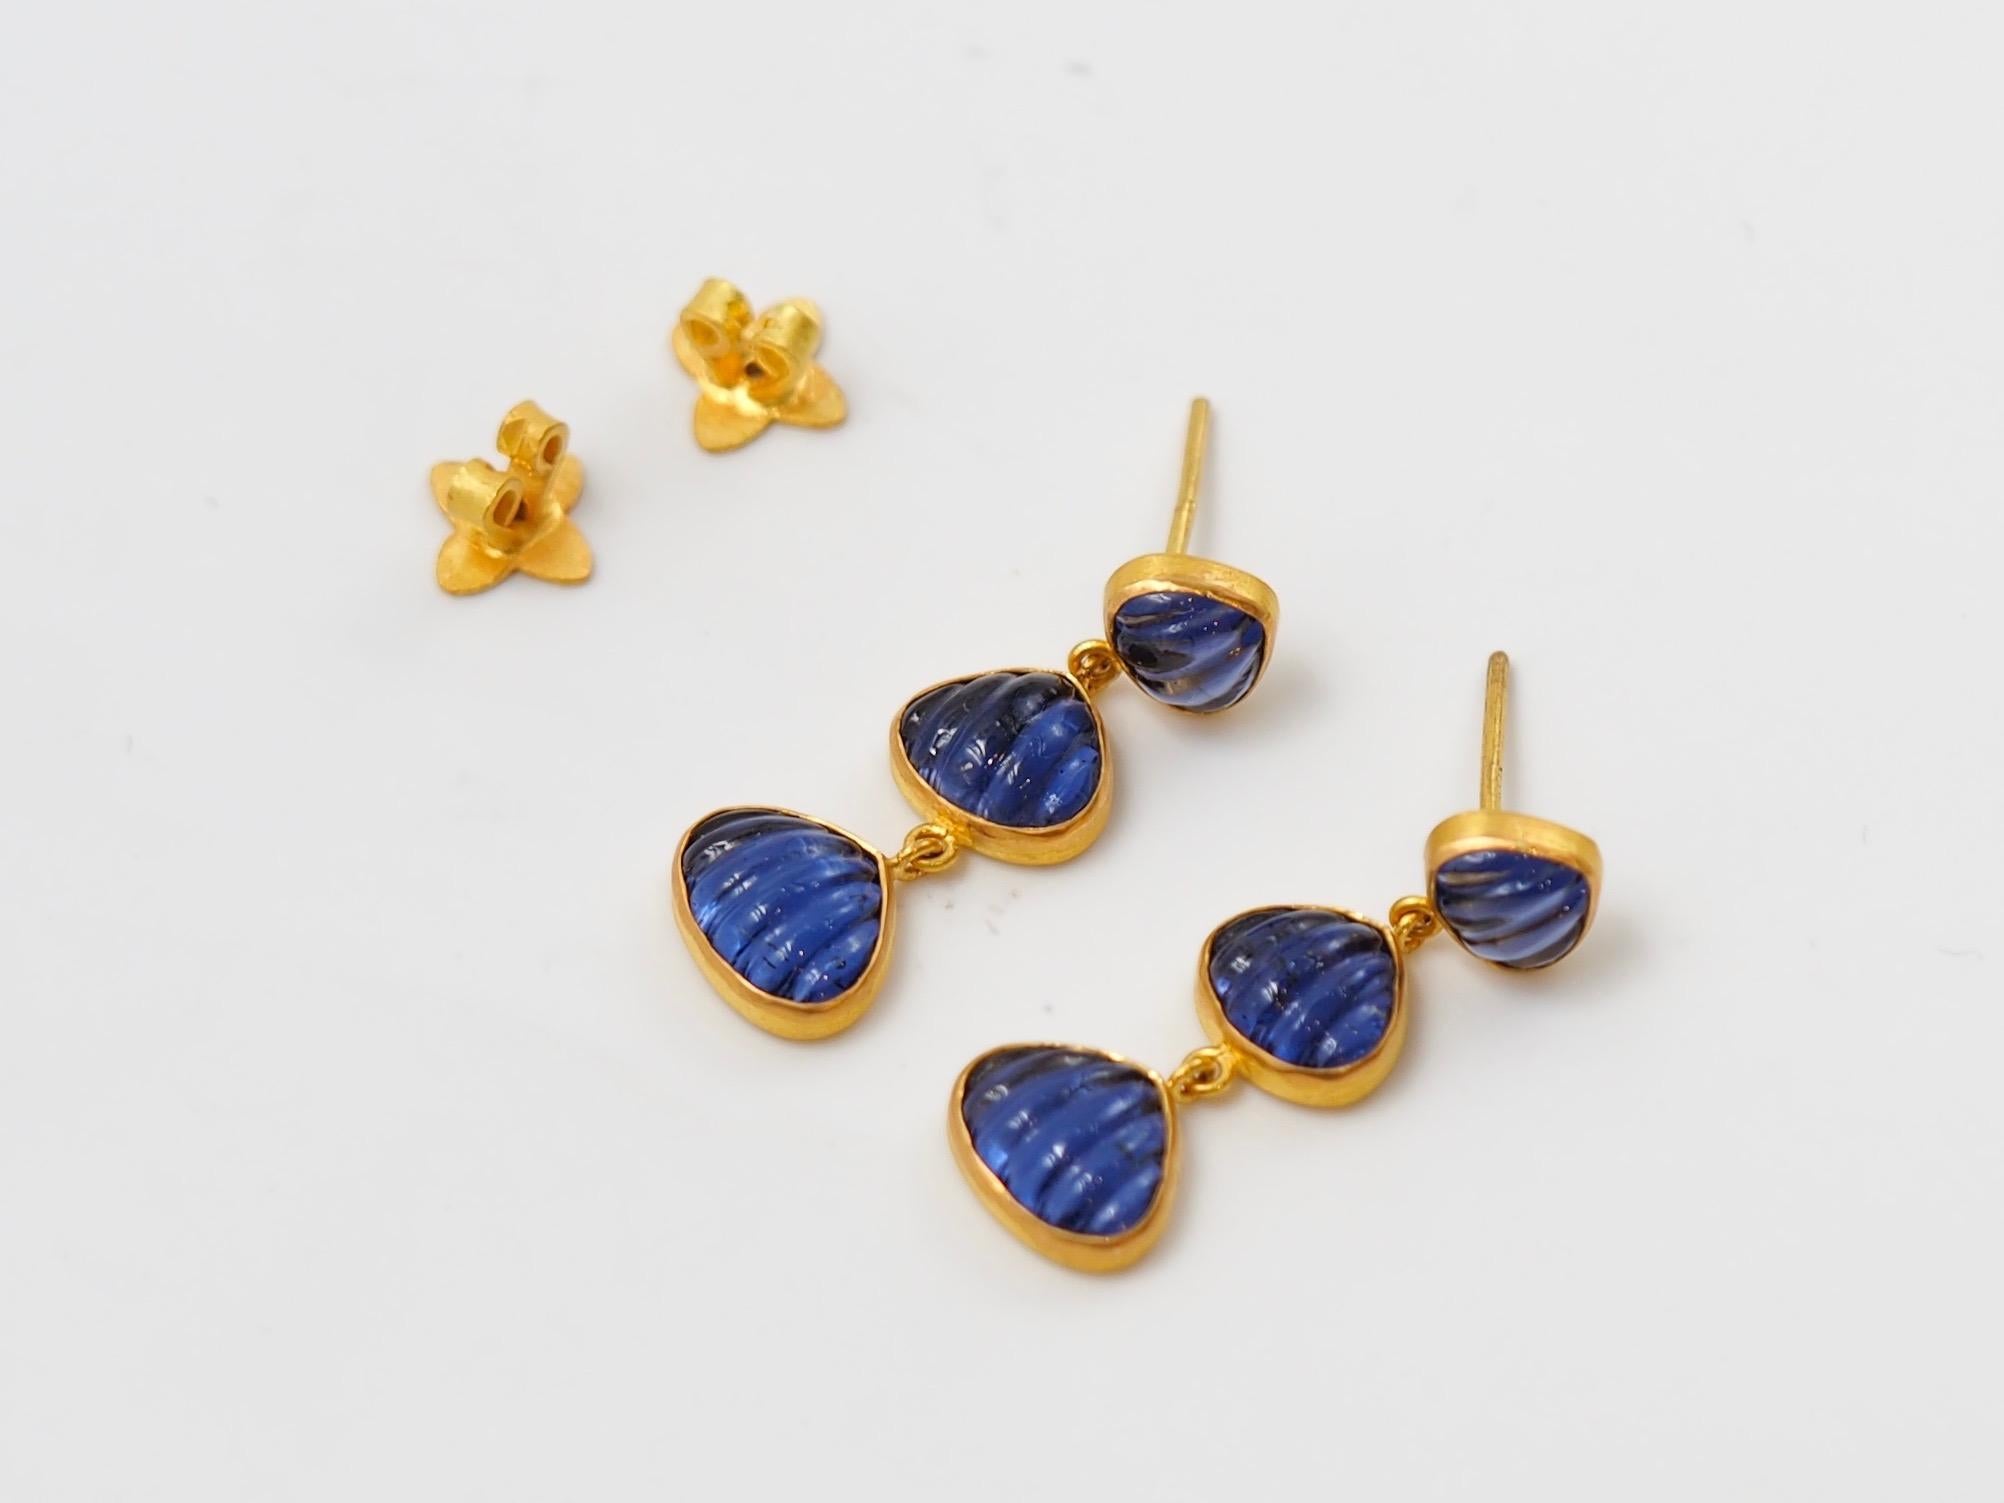 These earrings are composed of 6 iolites for a total weight of 5.8 carats. The iolites are hand-carved in the form of shells in 3 different sizes.
The shells are all set in 22 karat gold. The earrings are with a gold push / stud.
The earrings shows